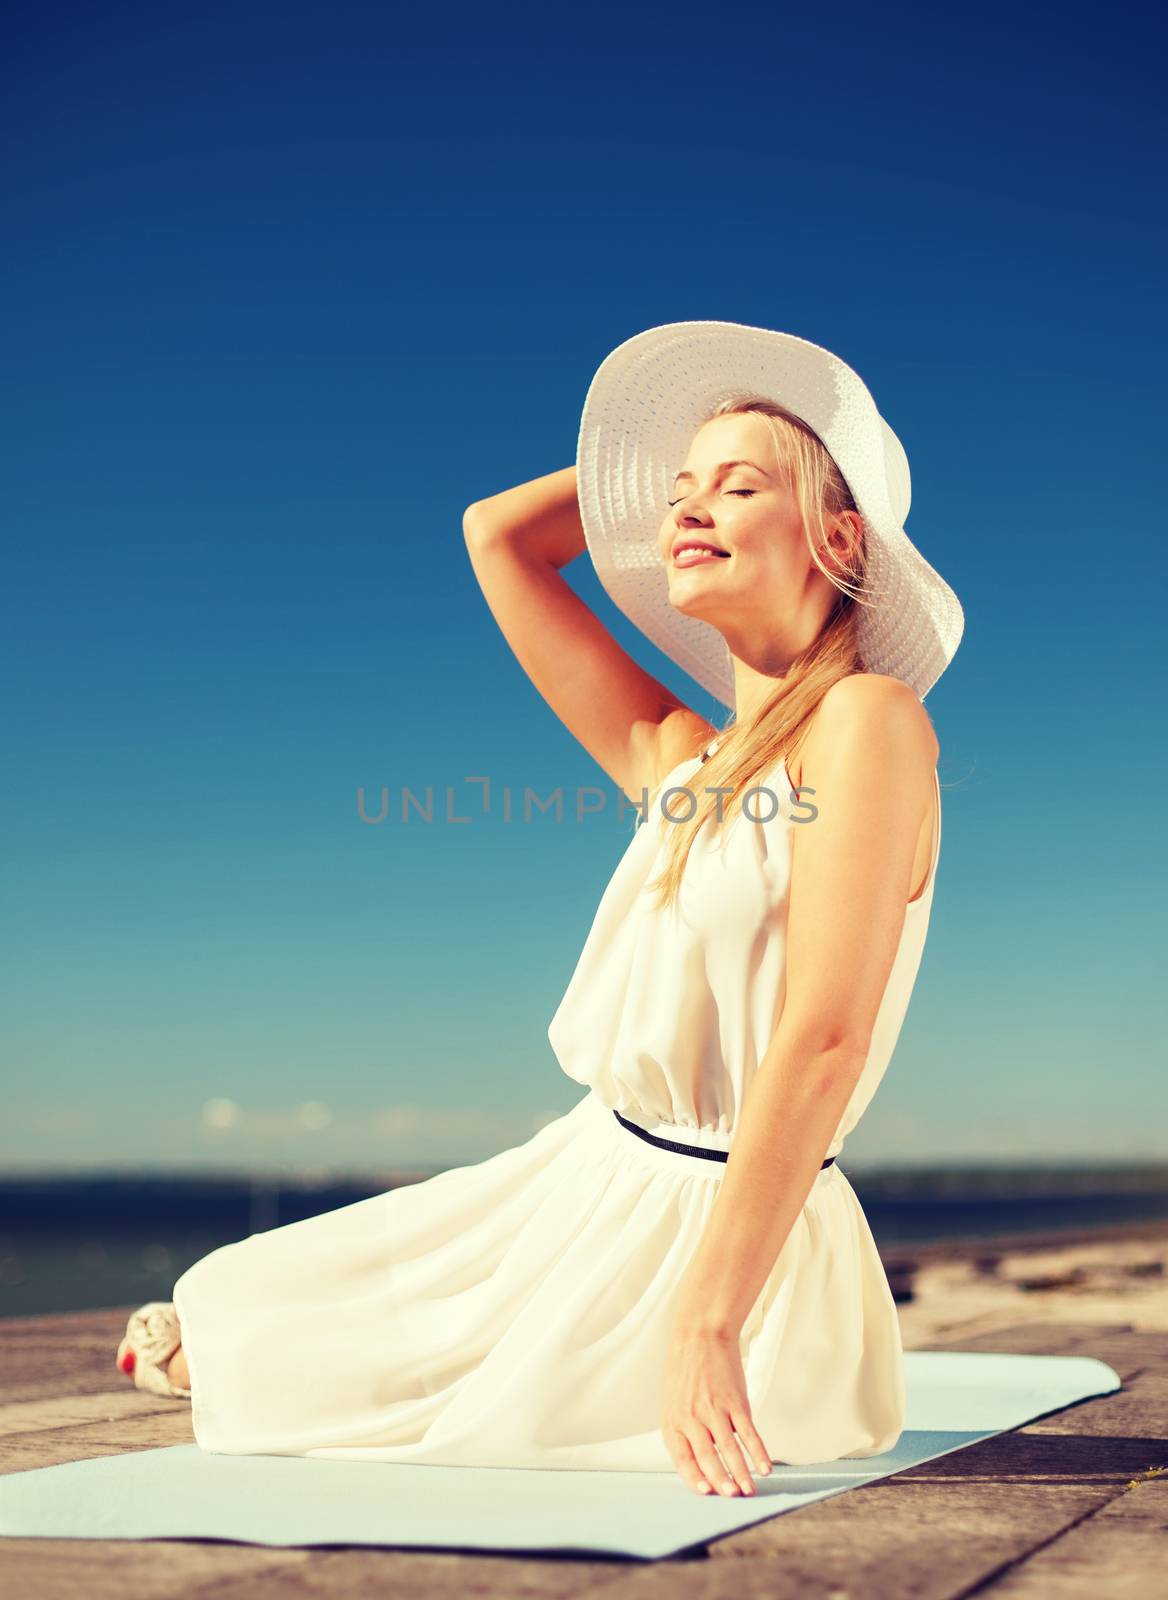 fashion and lifestyle concept - beautiful woman in hat enjoying summer outdoors